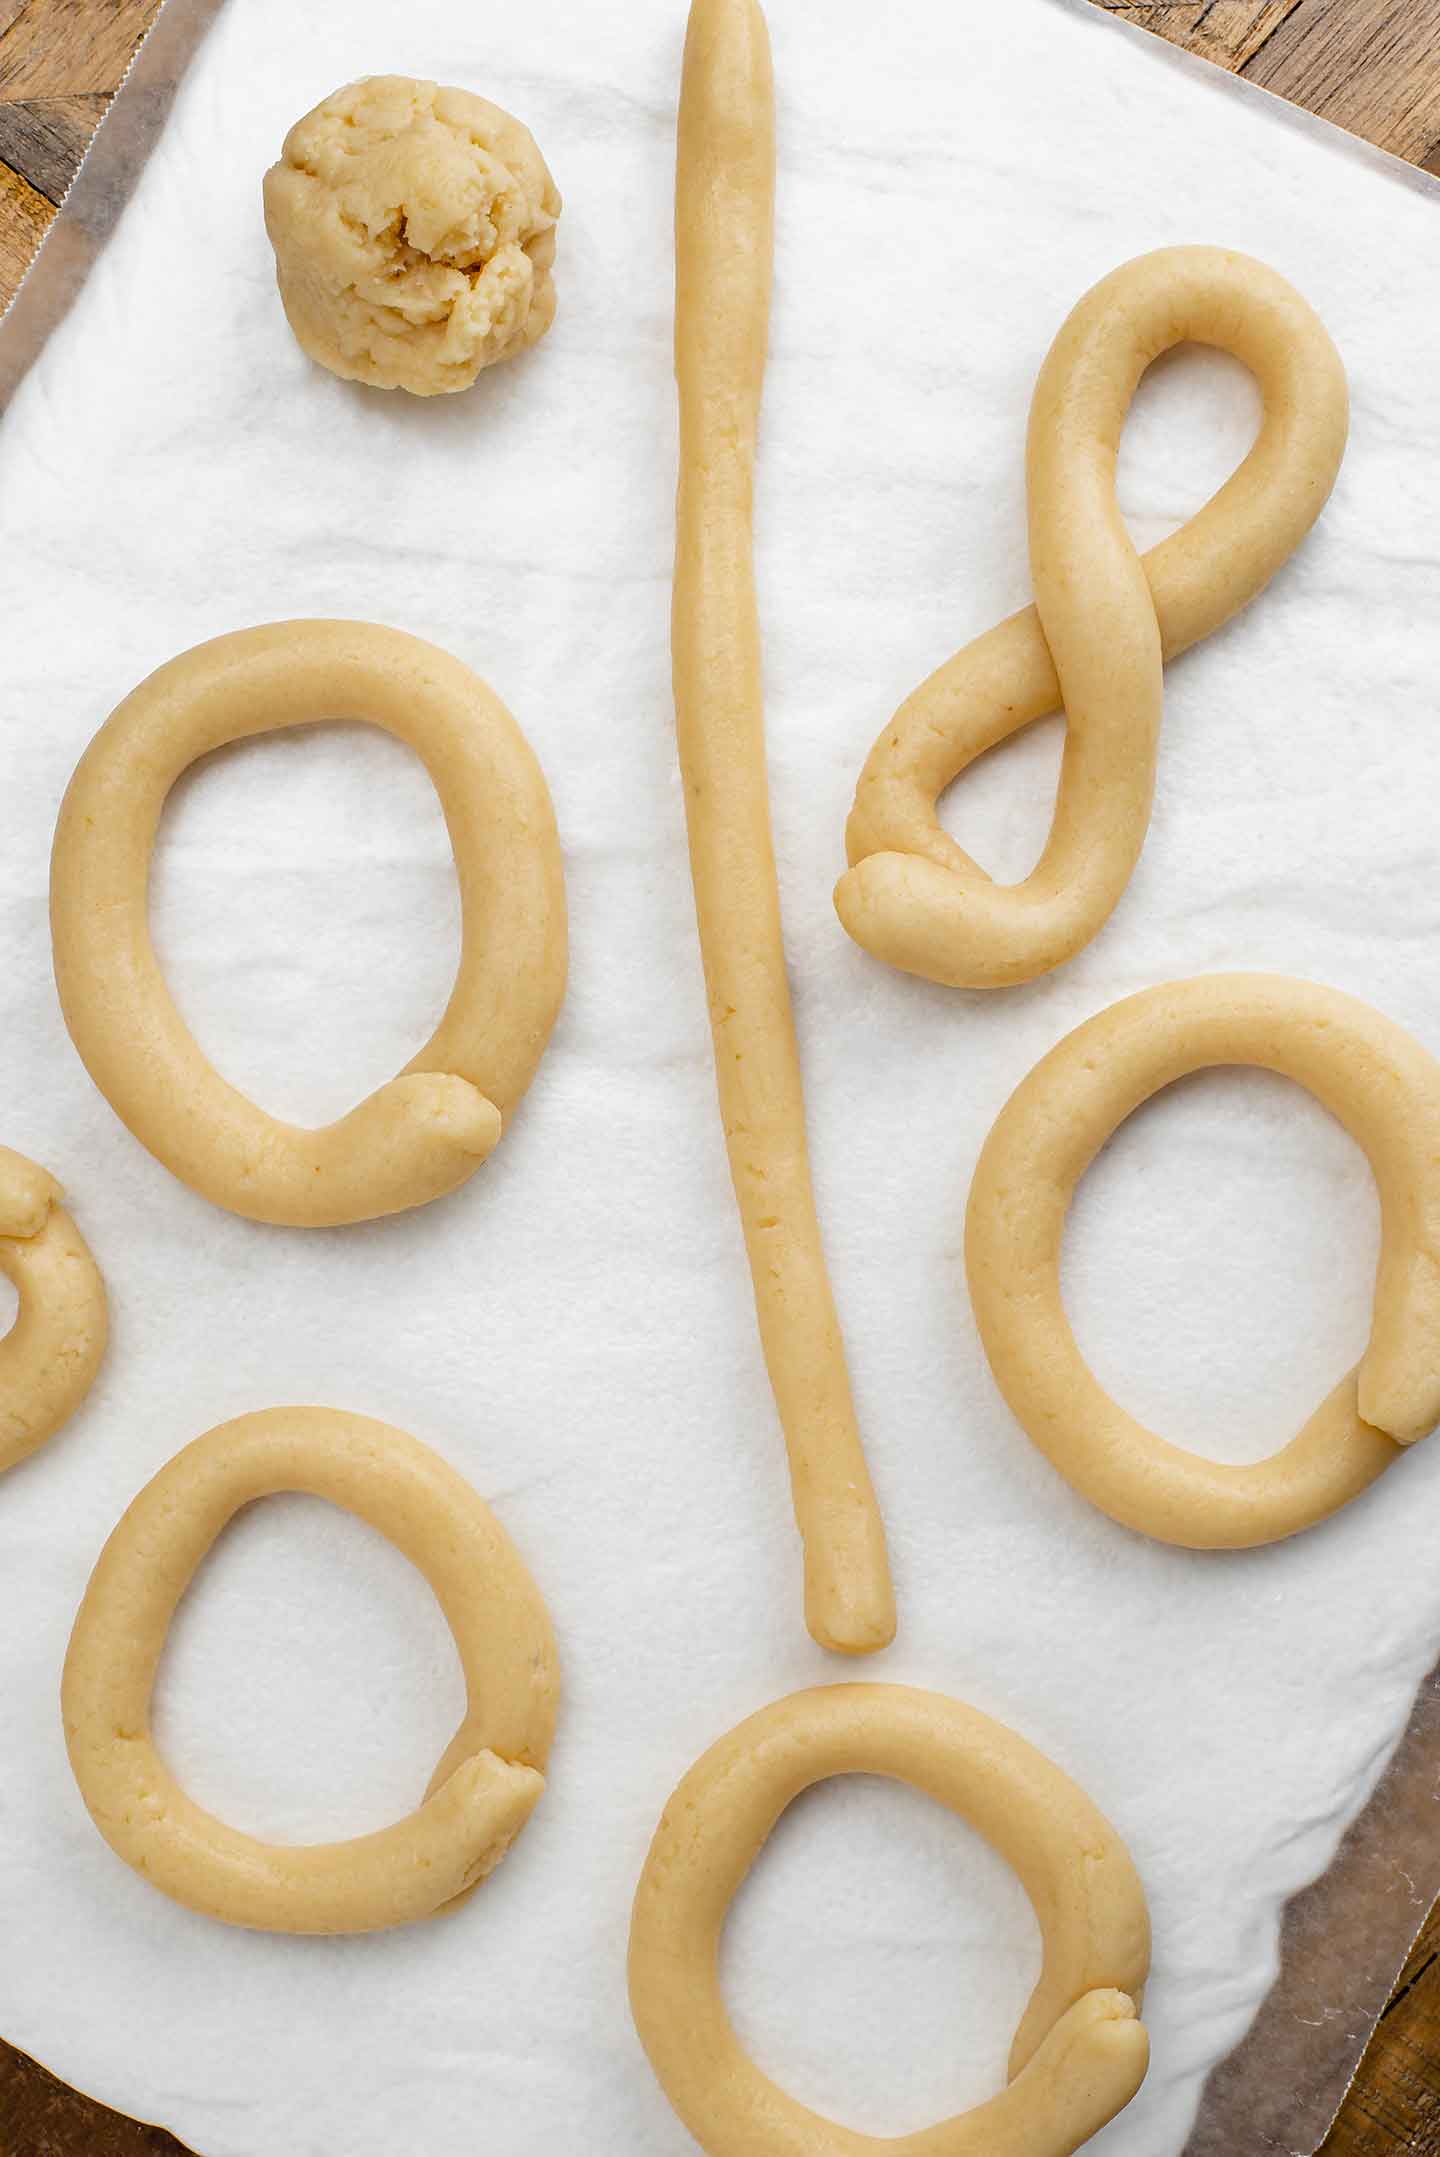 Top down view of vegan Portuguese biscoitos (cookies) being formed. Dough is first rolled into a long tubular shape and then two ends are brought together to form a circle or are twisted to create a figure eight.